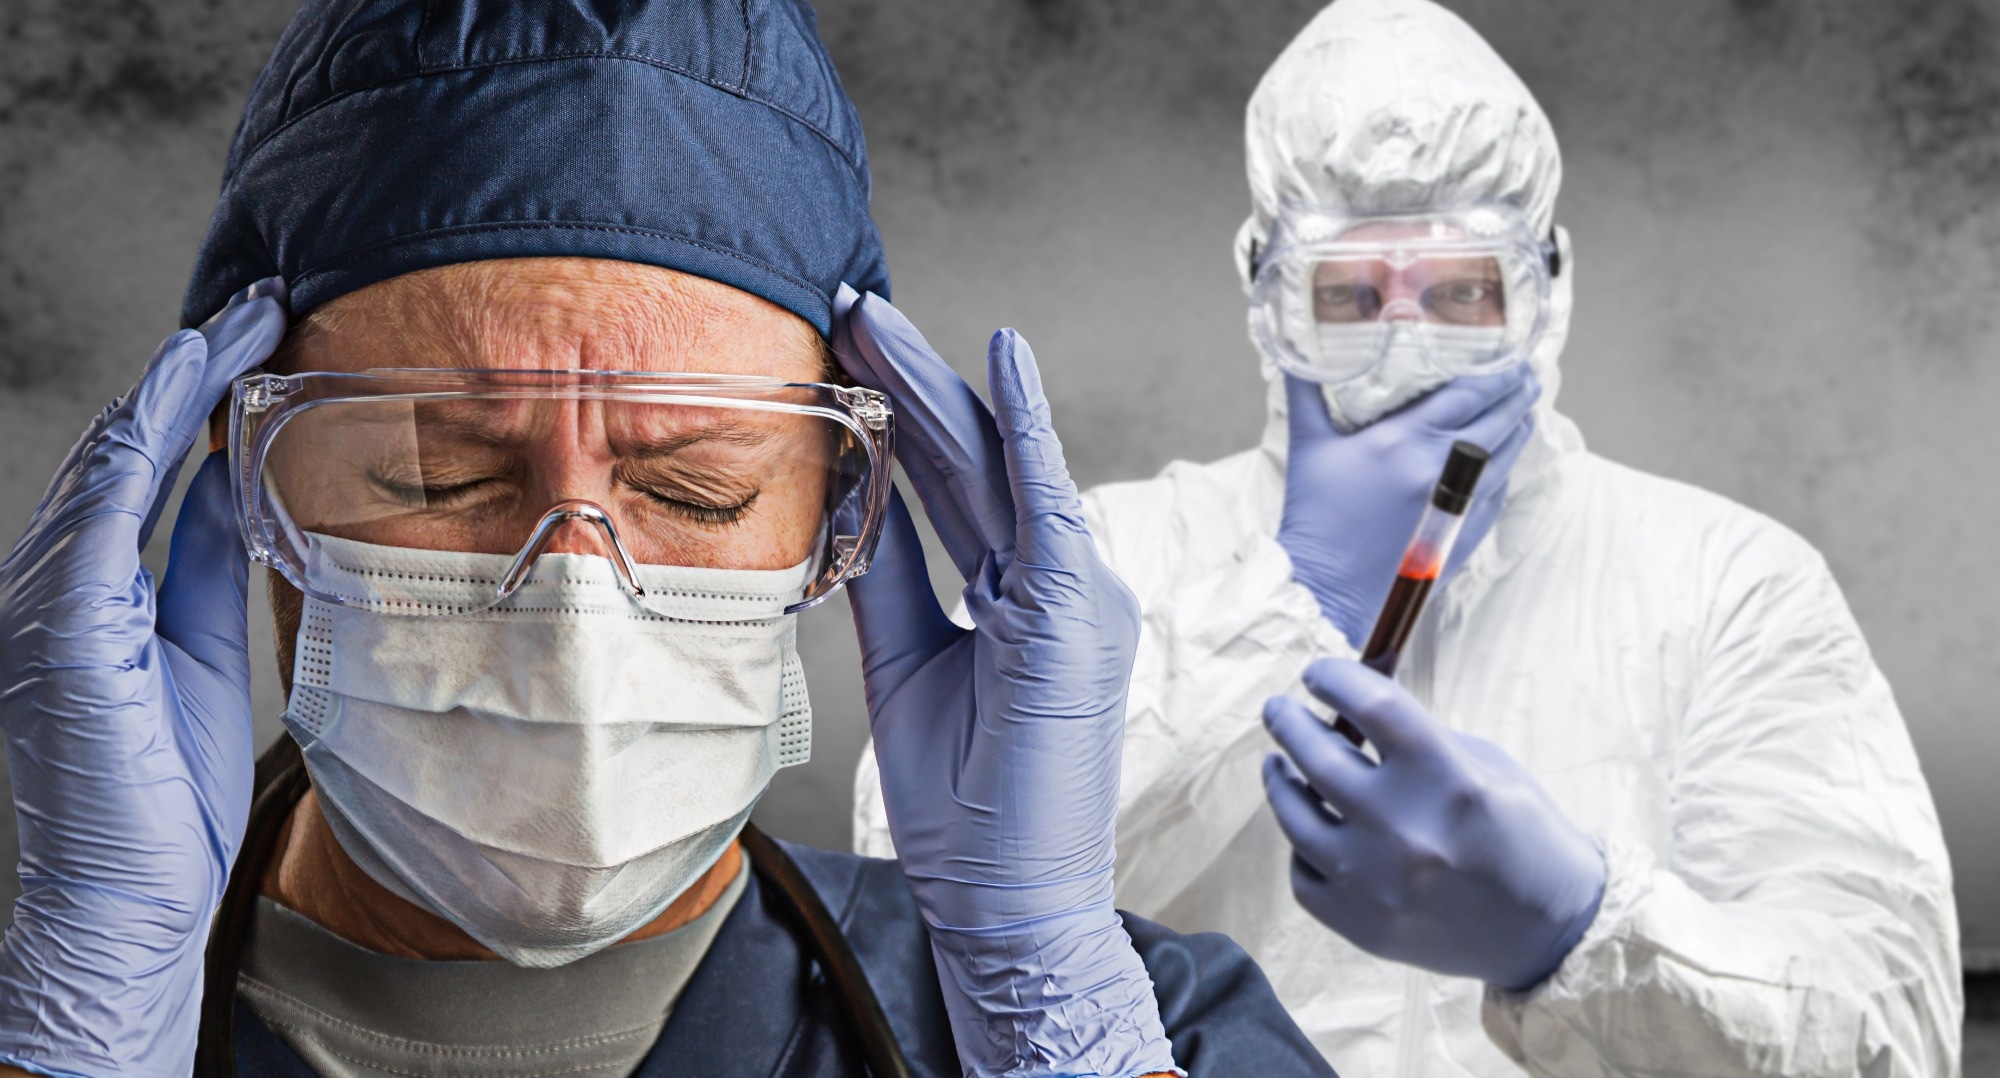 Ideas and Opinions: Universal Masking in Health Care Settings: A Pandemic Strategy Whose Time Has Come and Gone, For Now. Image Credit: Andy Dean Photography / Shutterstock